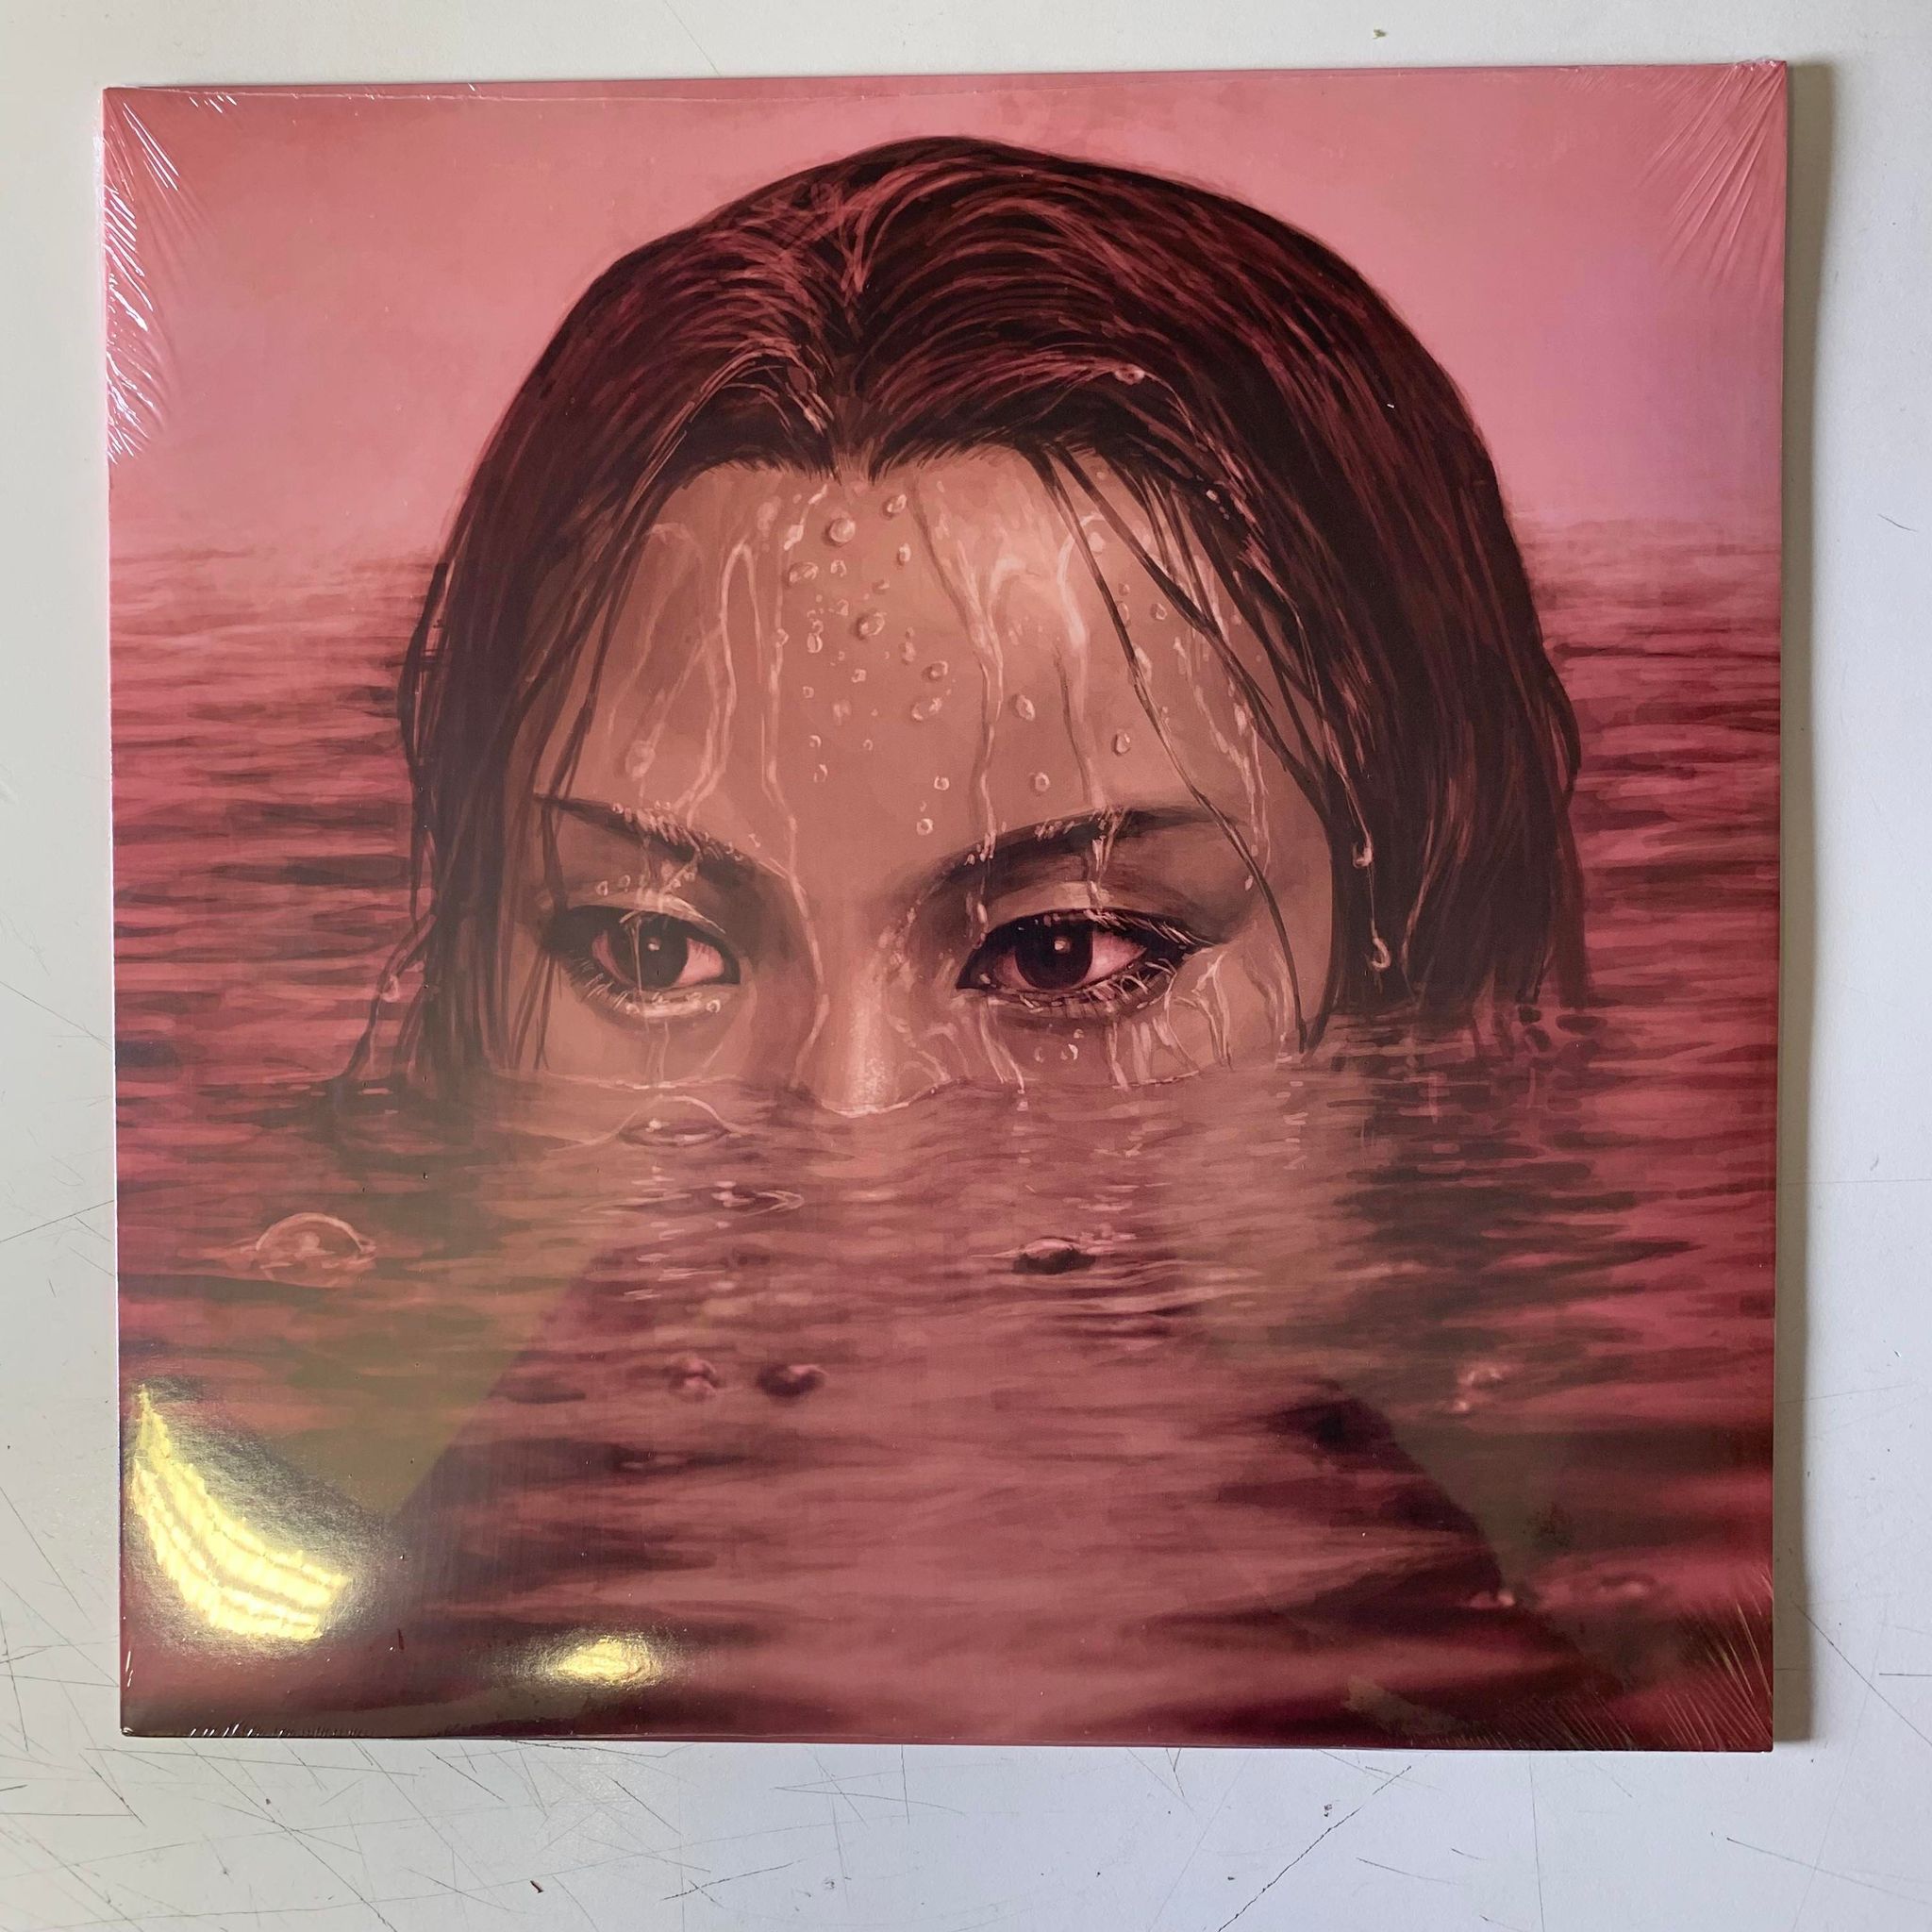 Wormrot "Hiss" Black Vinyl w/ Misprinted Pink Cover (100 Copies Only!)